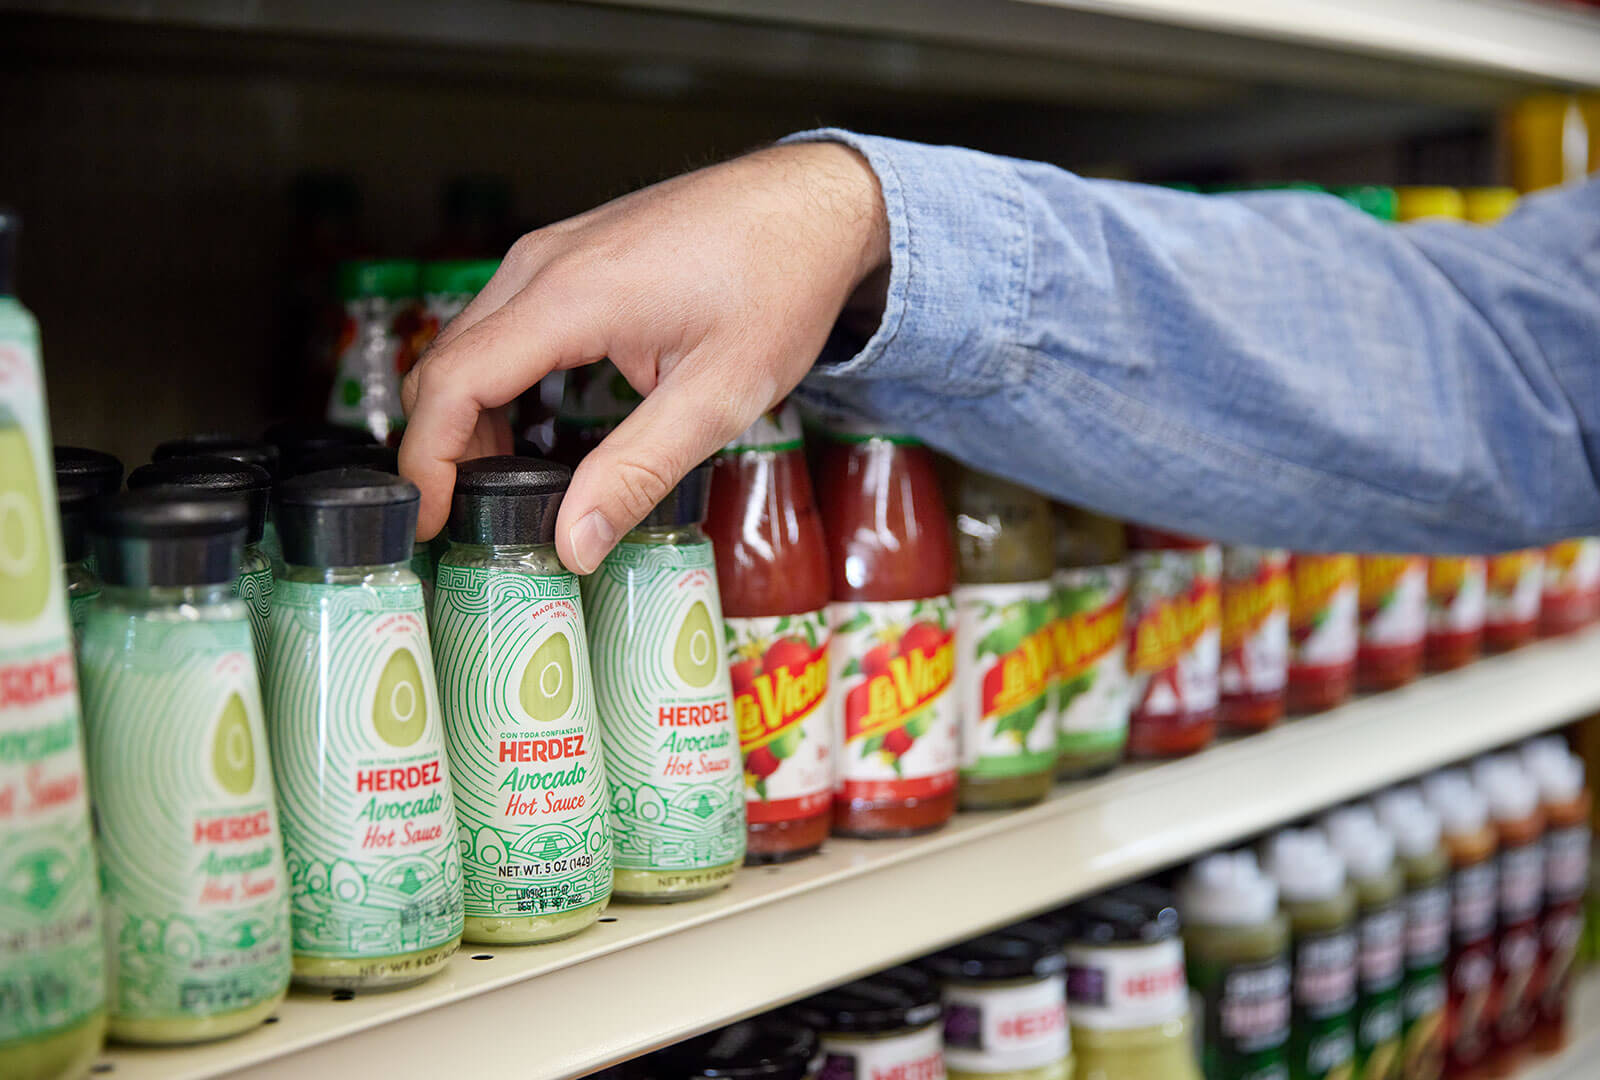 A hand reaching out and grabbing a bottle of Herdez Avocado hot sauce